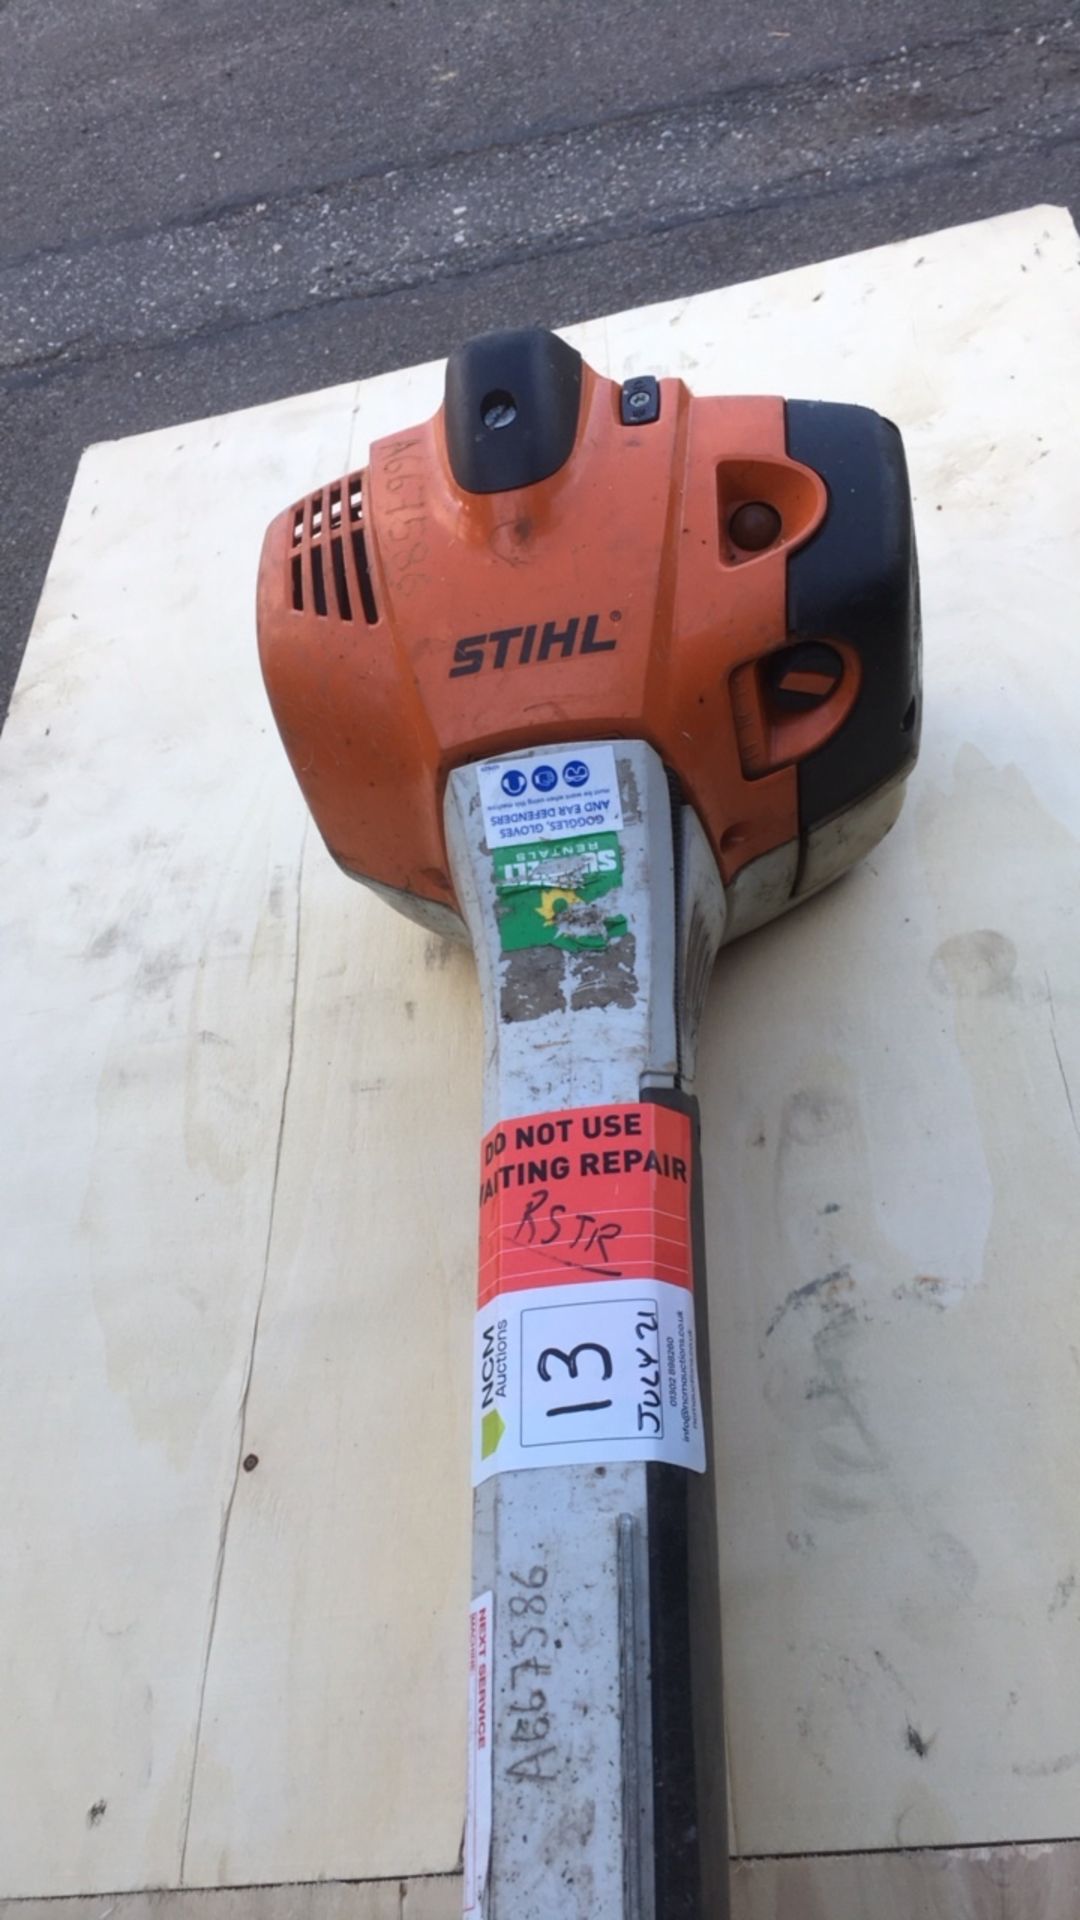 Stihl FS460 C trimmer (A667586) - Image 3 of 4